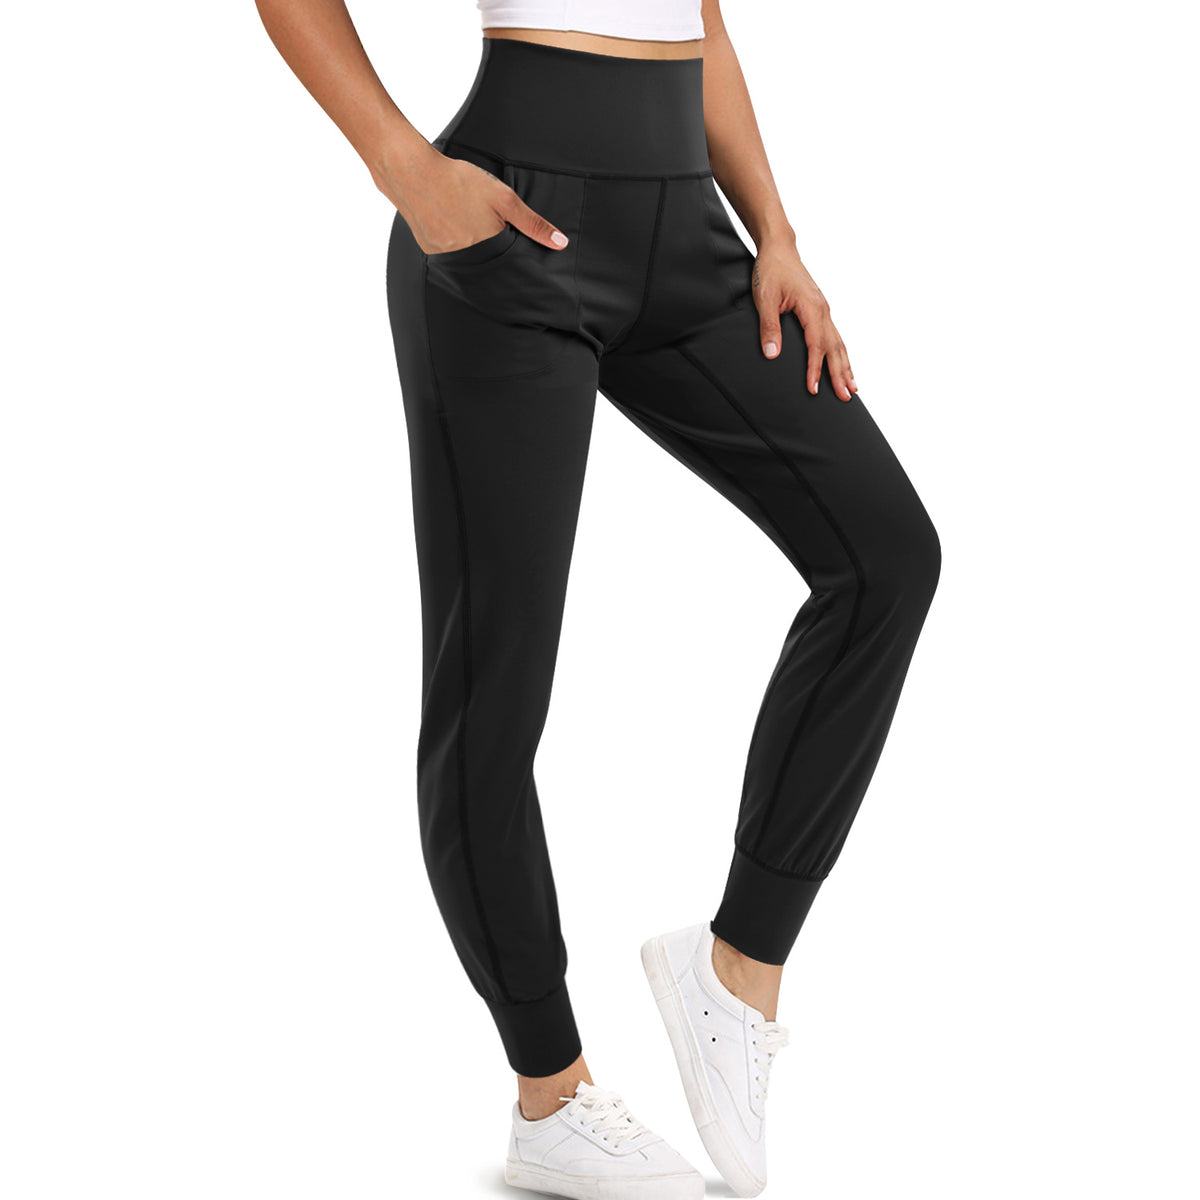 High Waist Black Yaga And Jogger Track Pants With Side Pocket For Women - Nebility